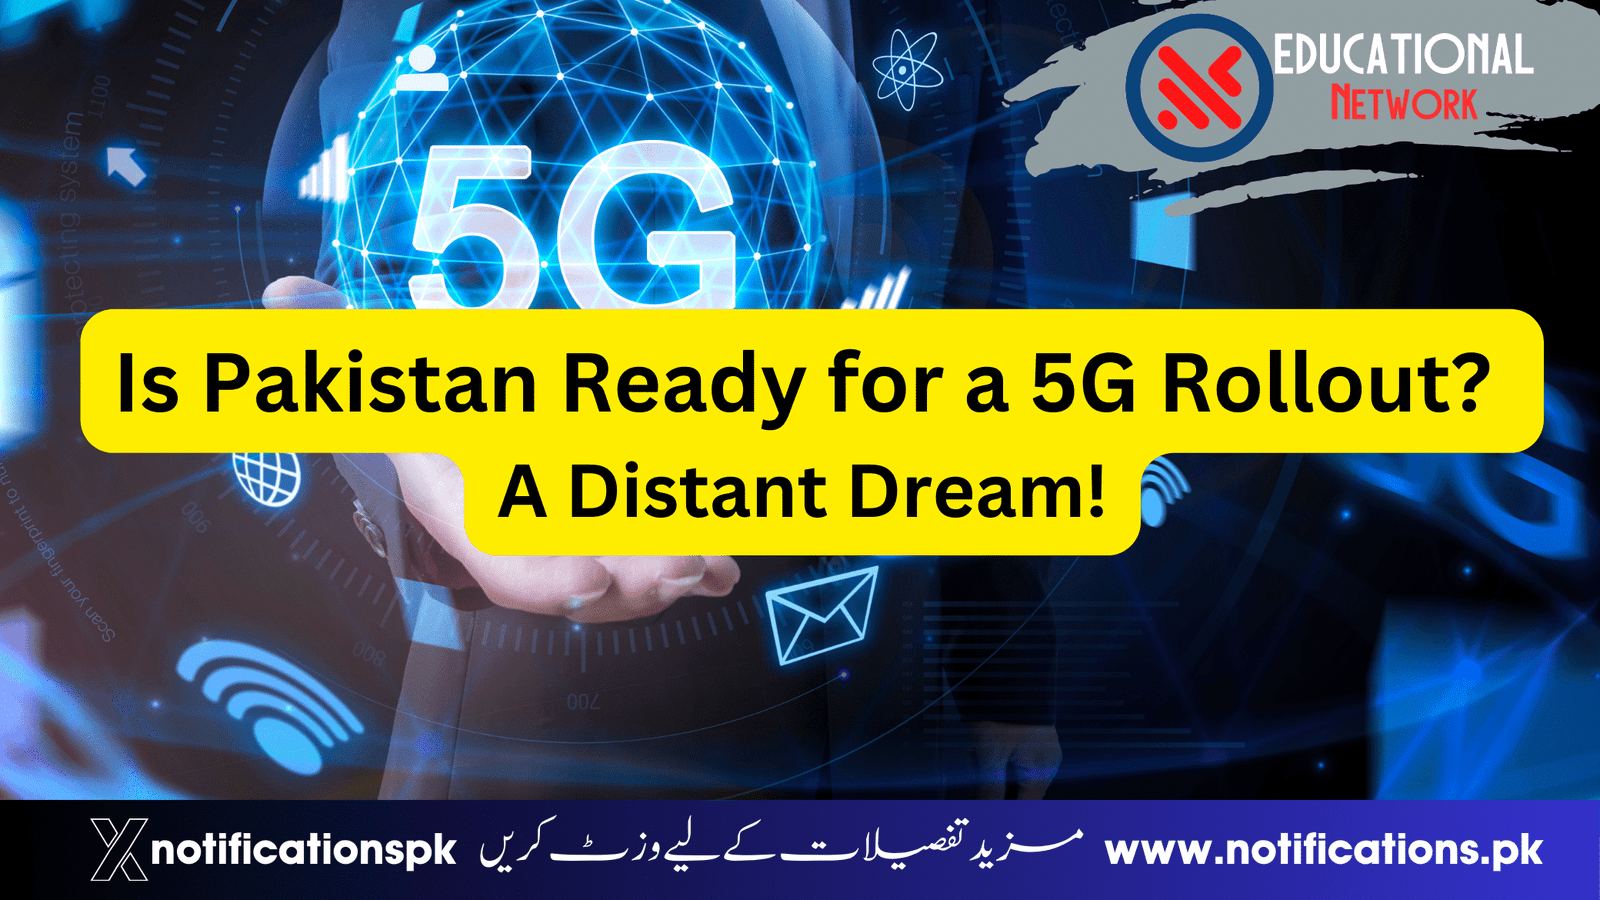 The Latest Updates on 5G in Pakistan